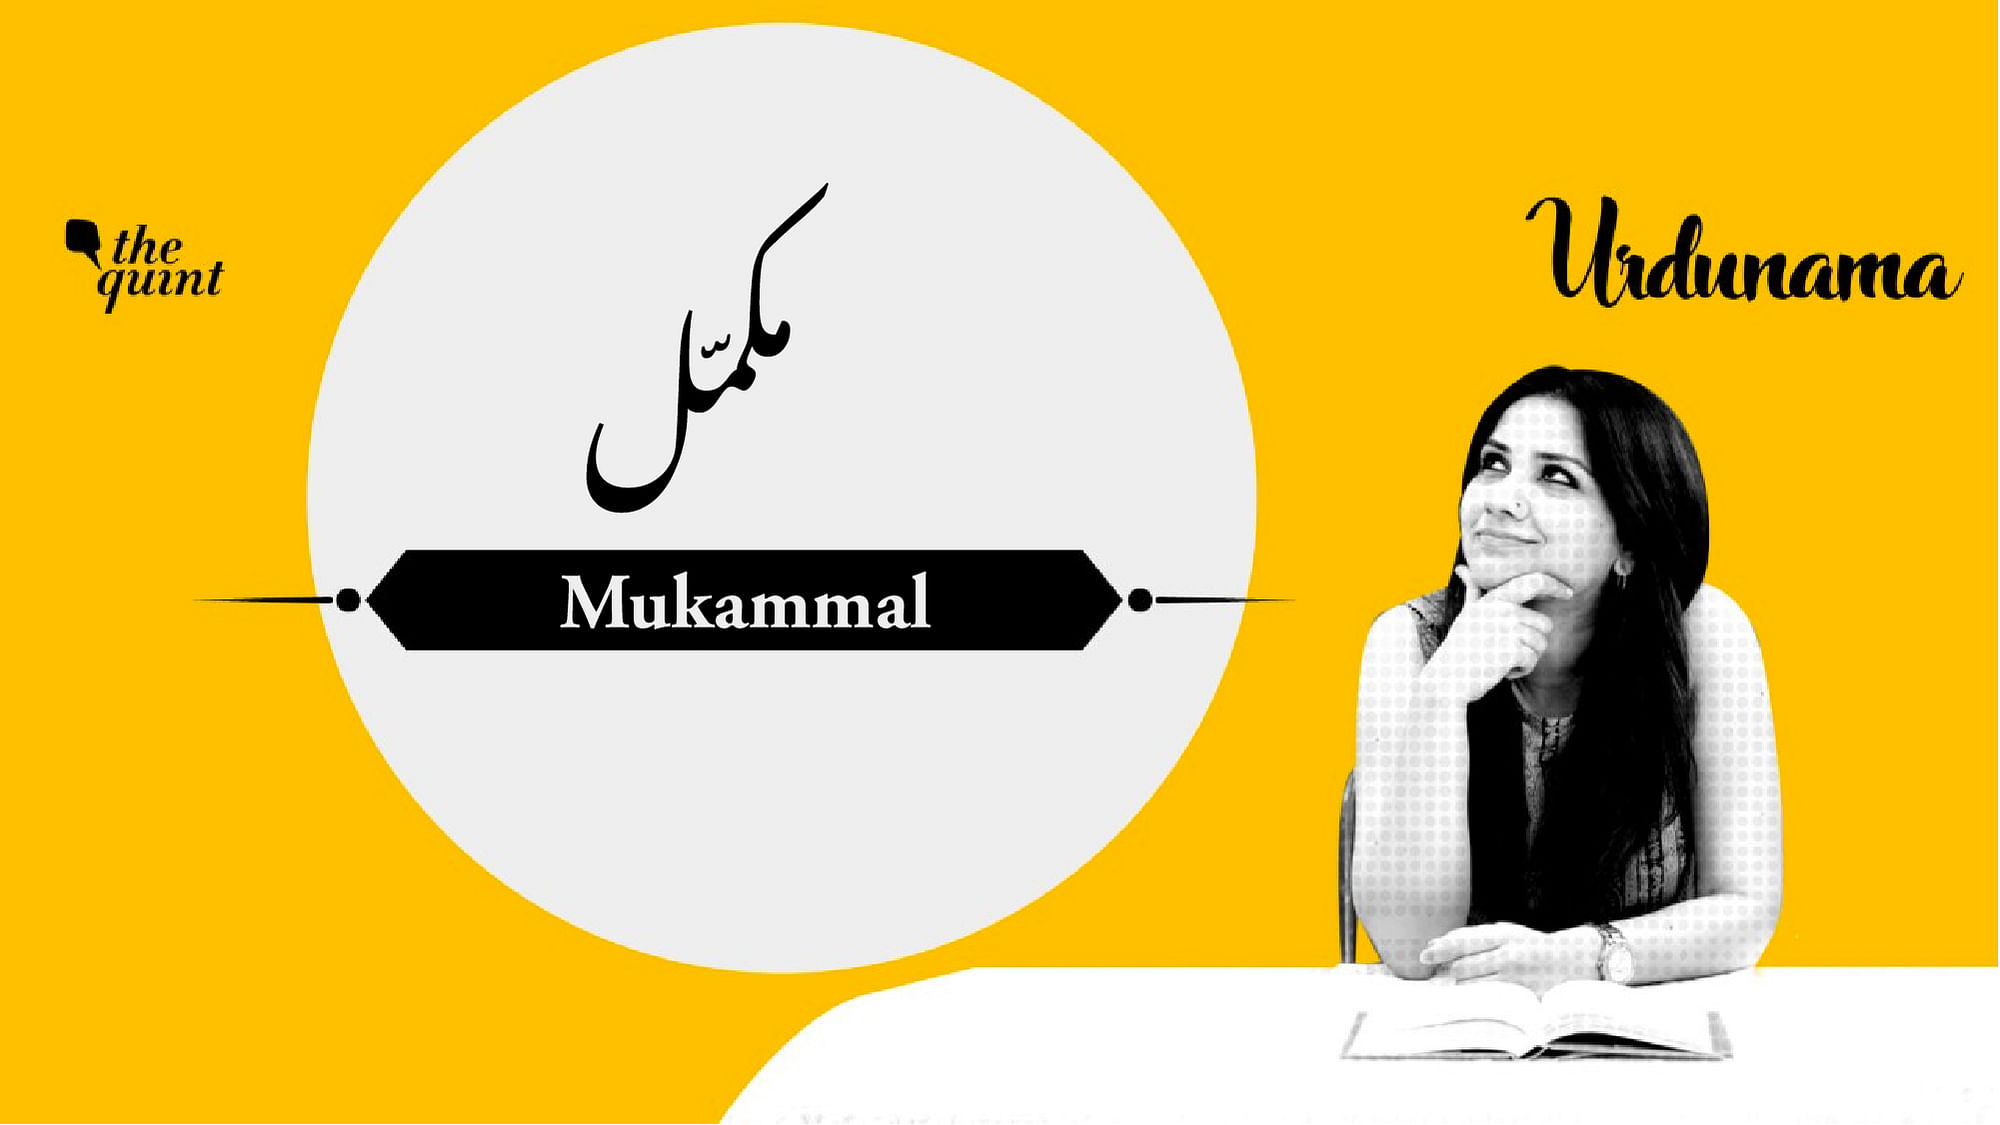 Learn the meaning of ‘Mukammal’ in the latest episode of Urdunama.